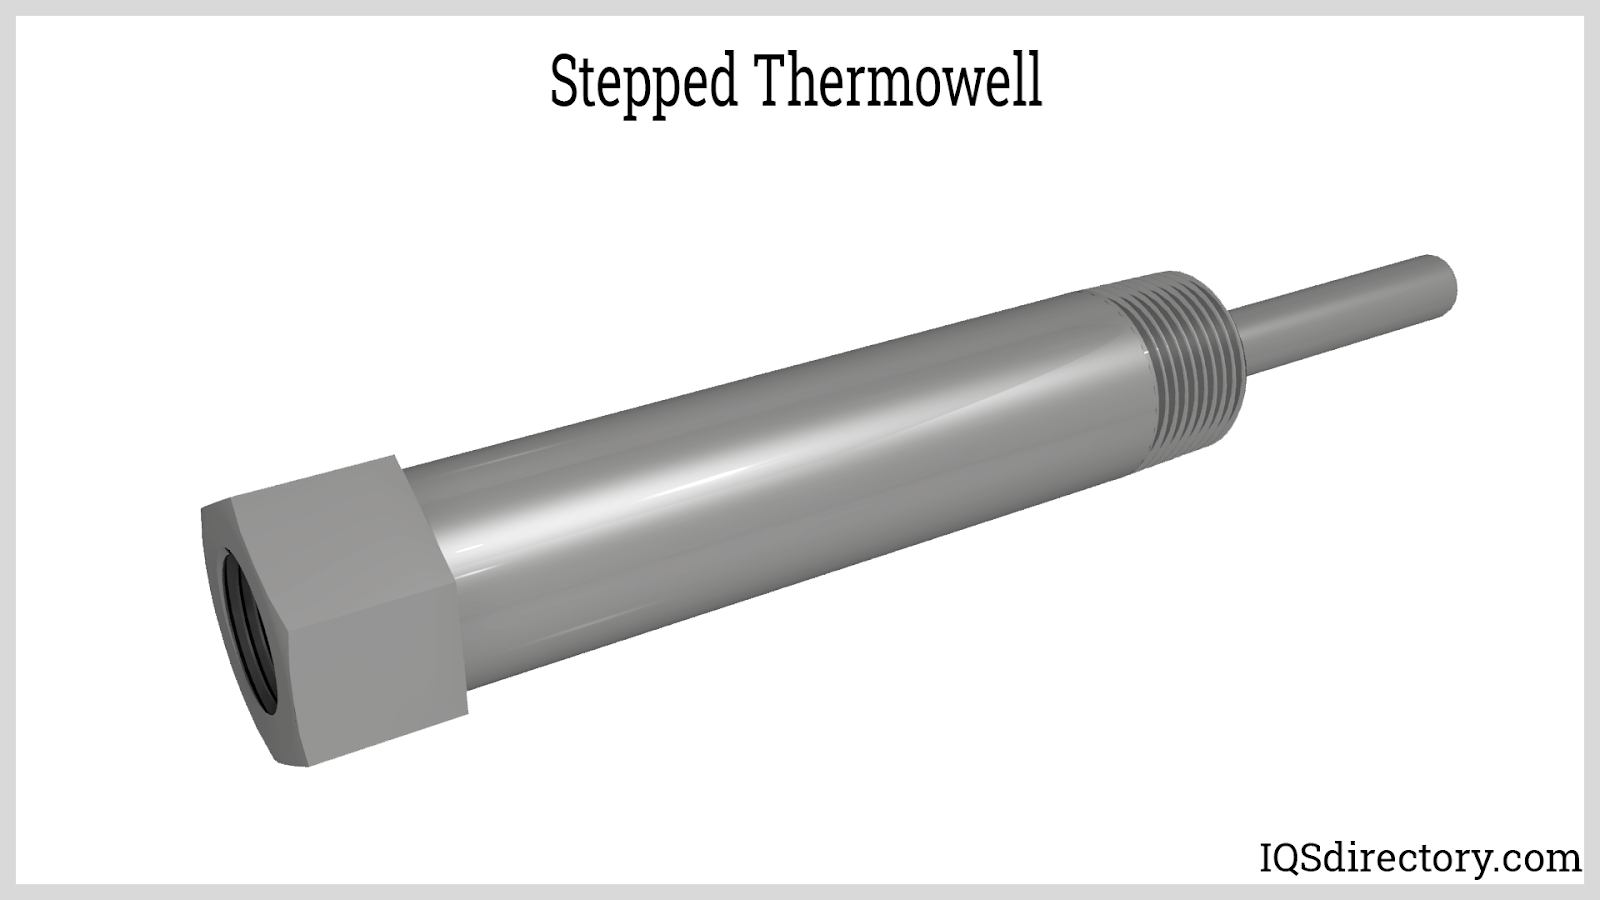 Stepped Thermowell